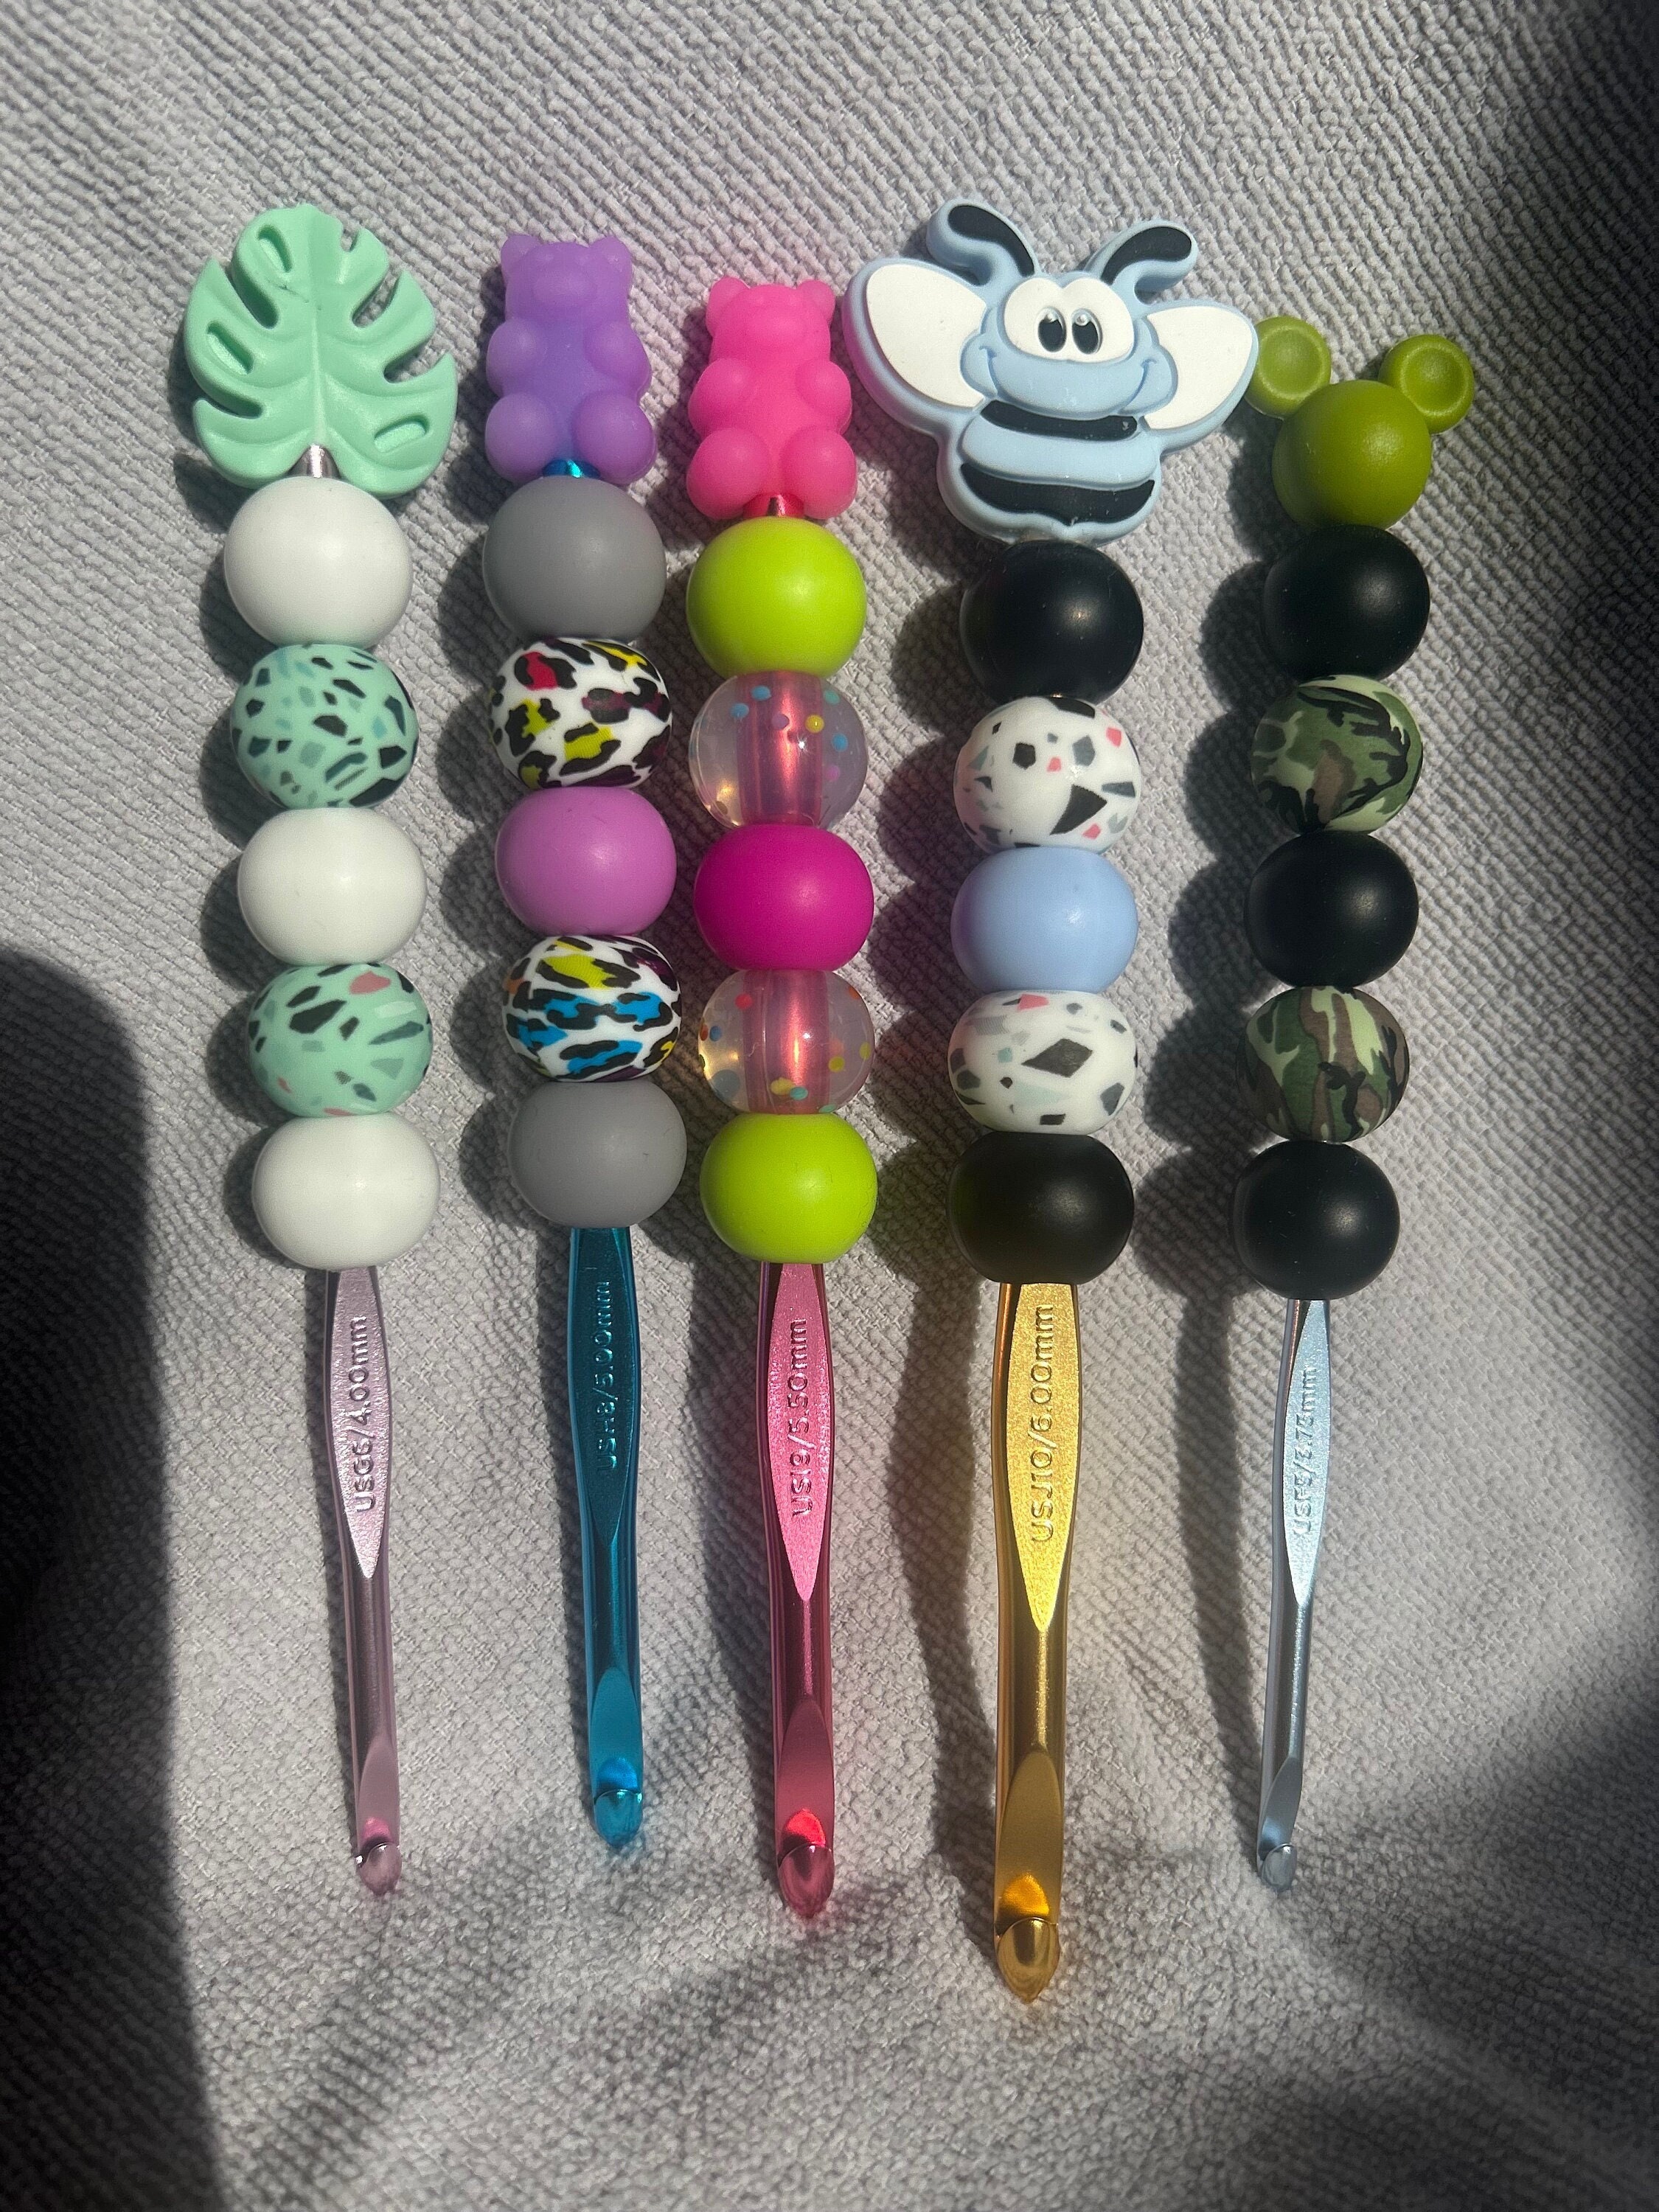 Beaded Ergonomic Crochet Hook With Silicone Beads and a Silicone Focal Bead.  This is an 8mm Size or an L Crochet Hook. 